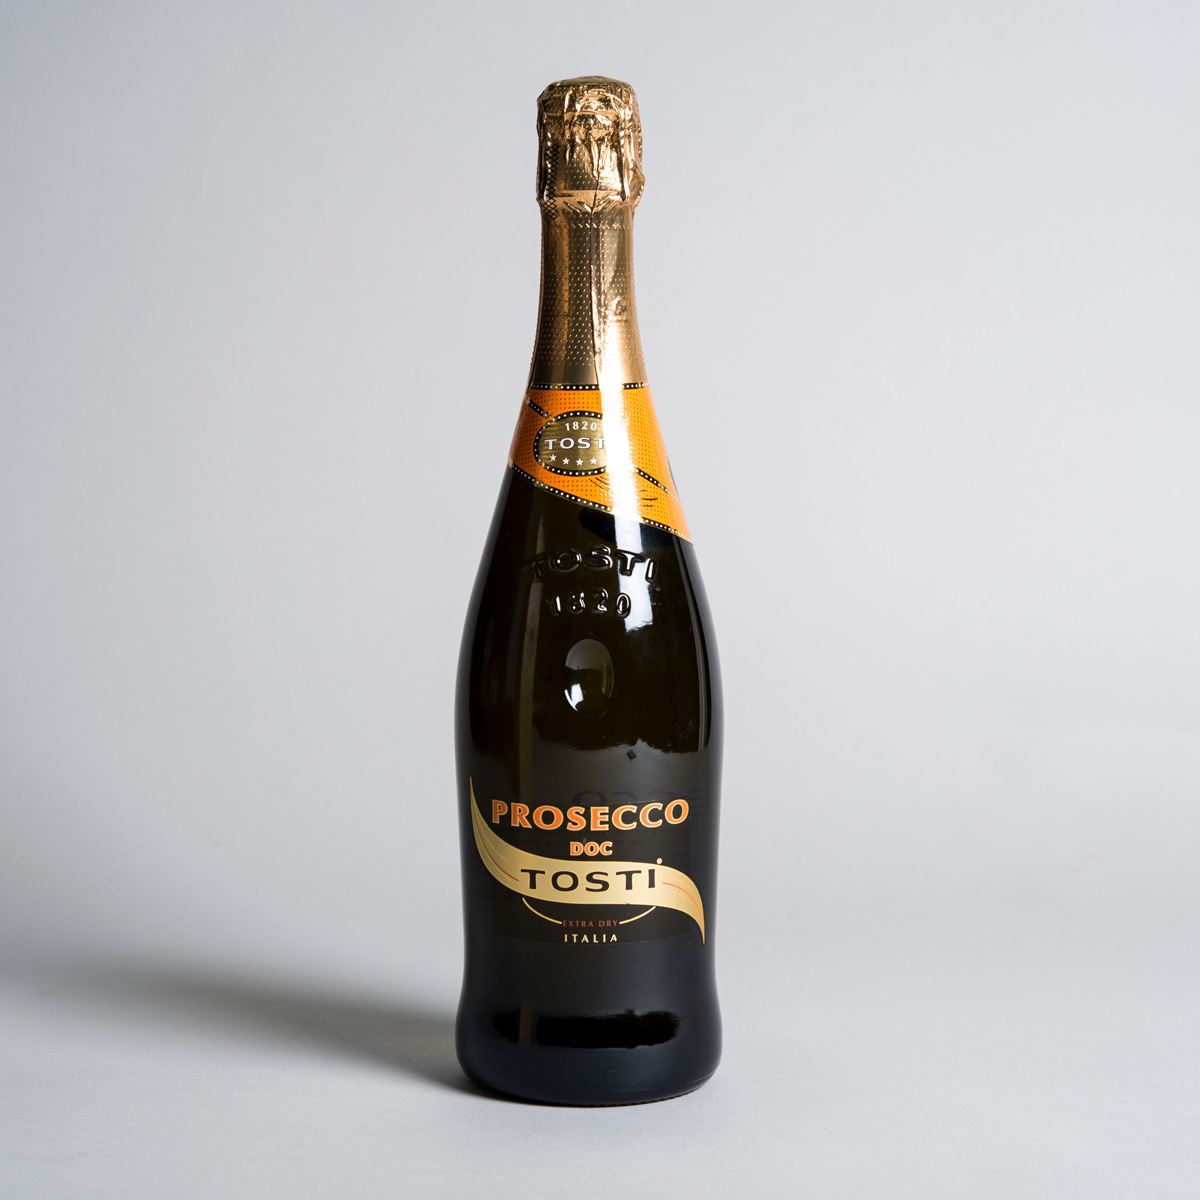 Engraved Wooden Box With Luxury Prosecco - Bust Out The Bubbly